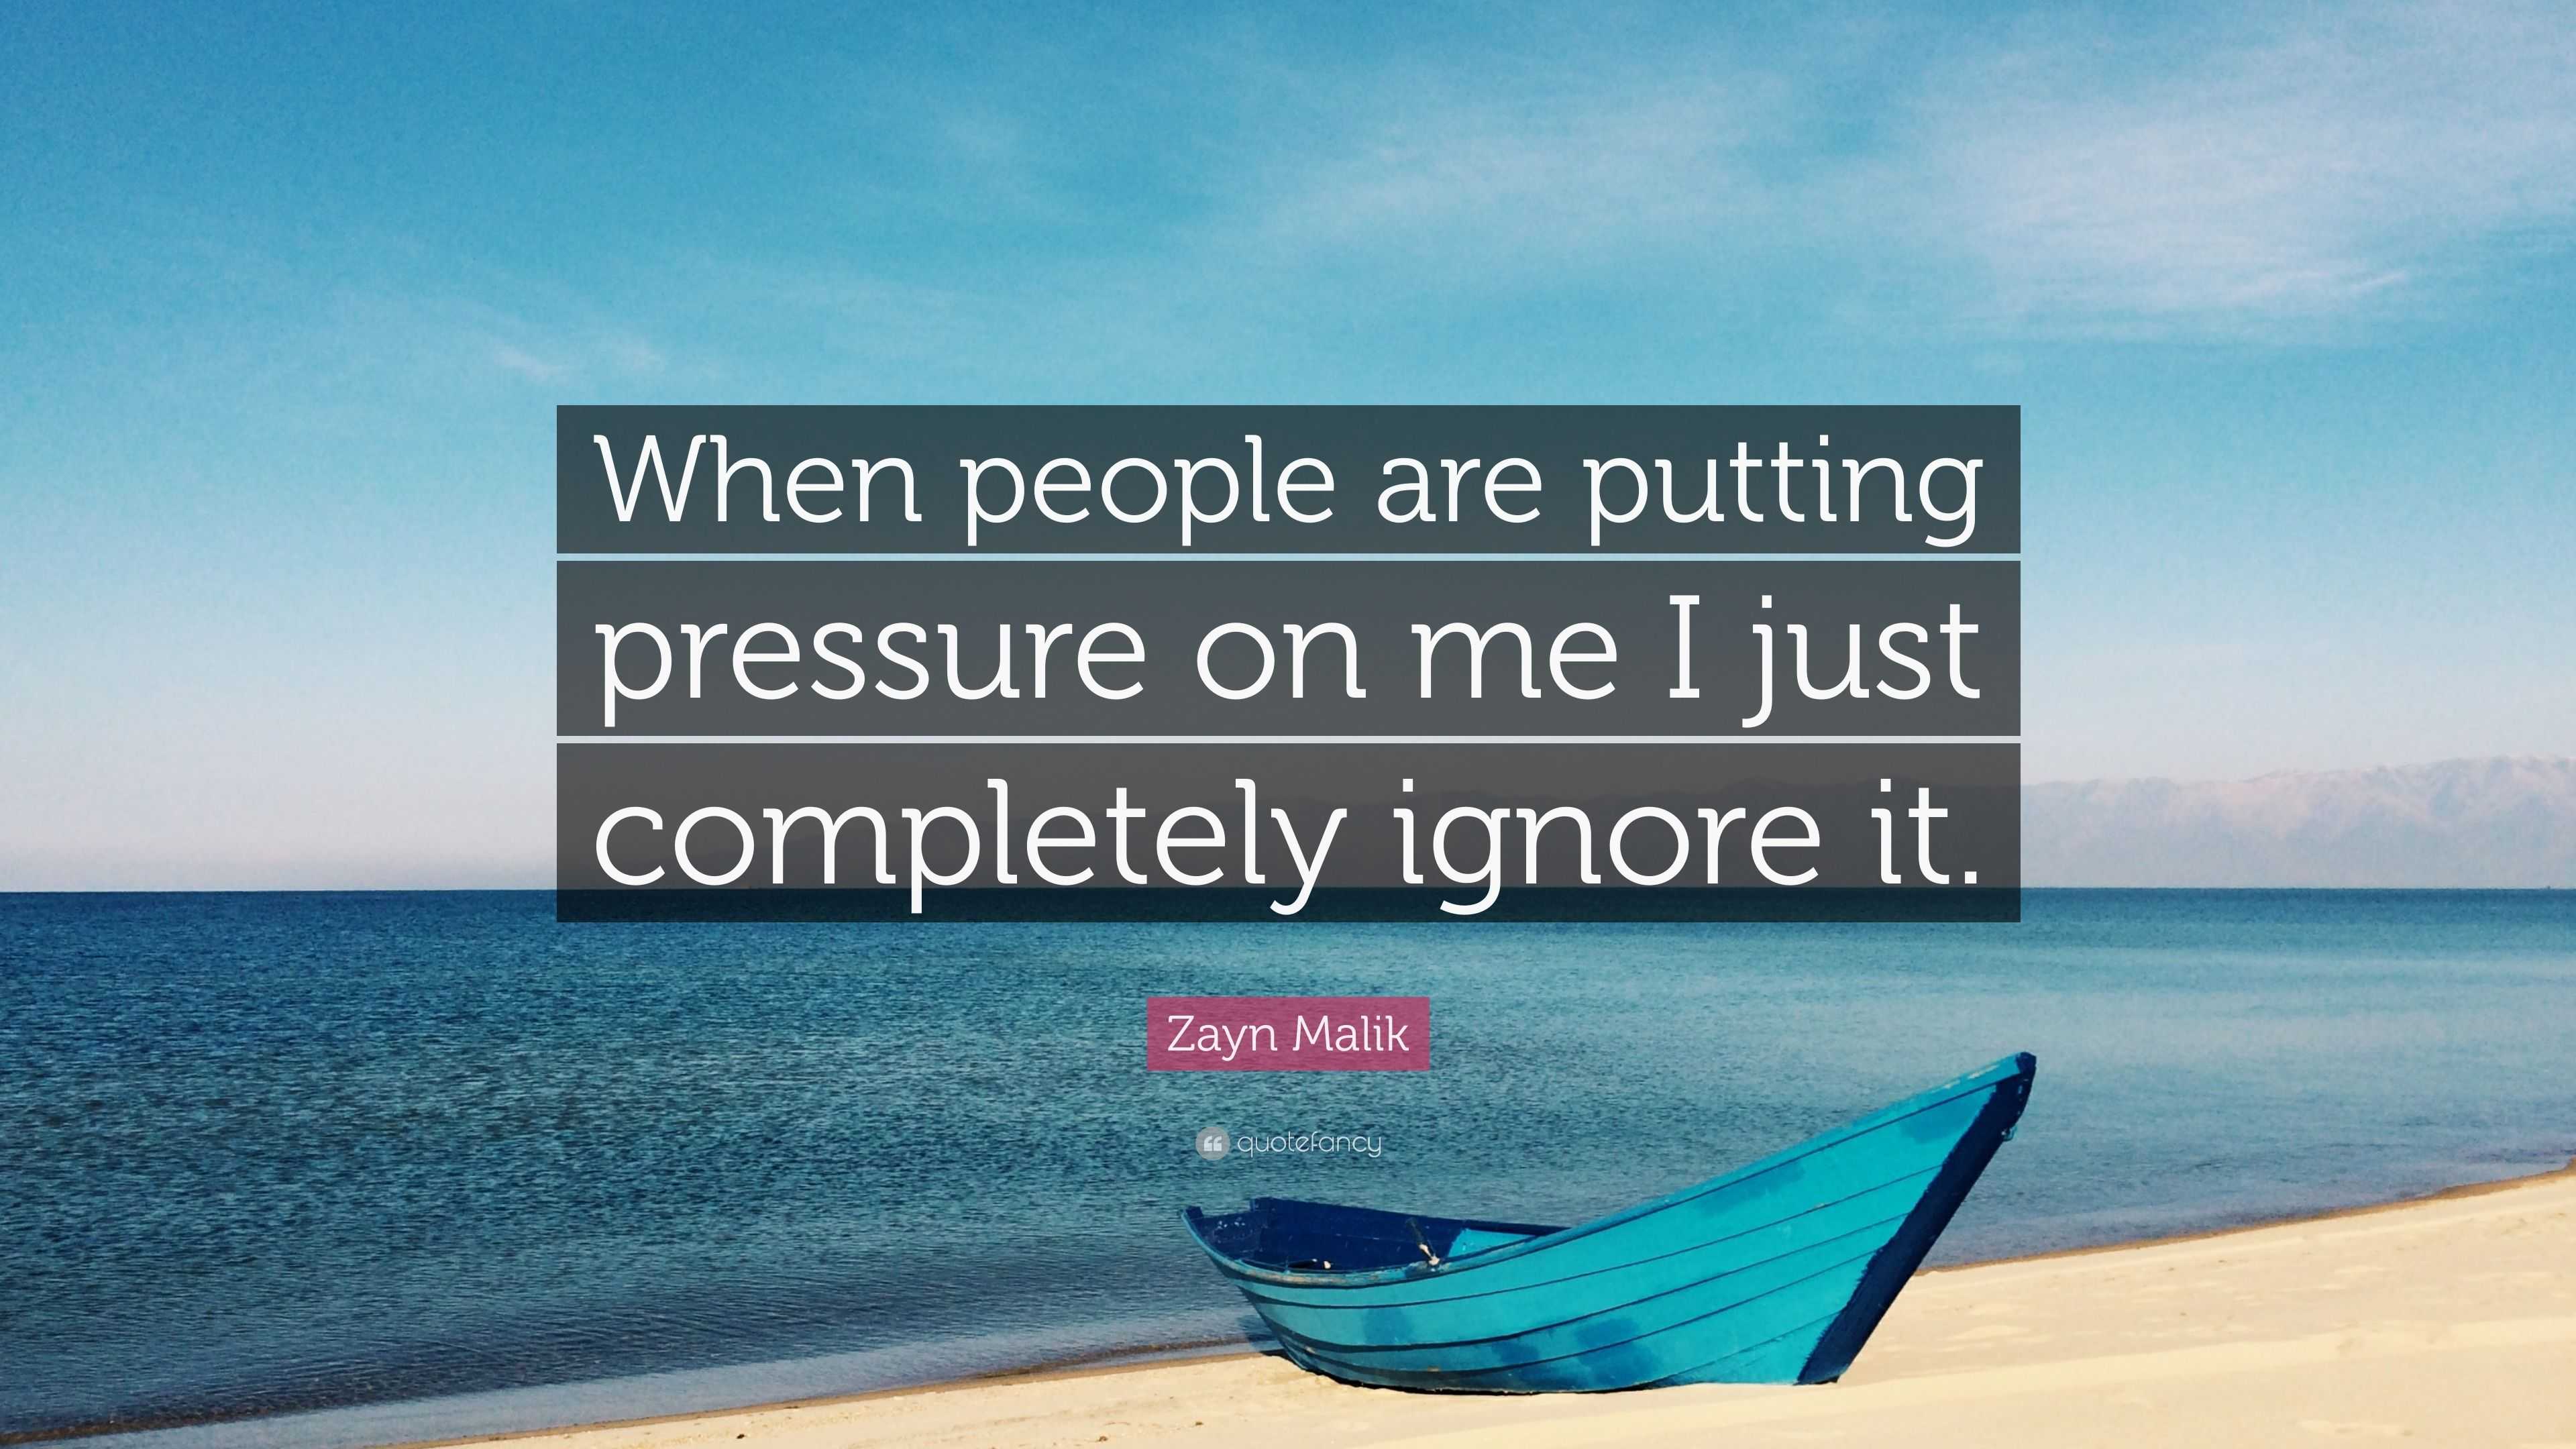 Zayn Malik Quote: “When people are putting pressure on me I just